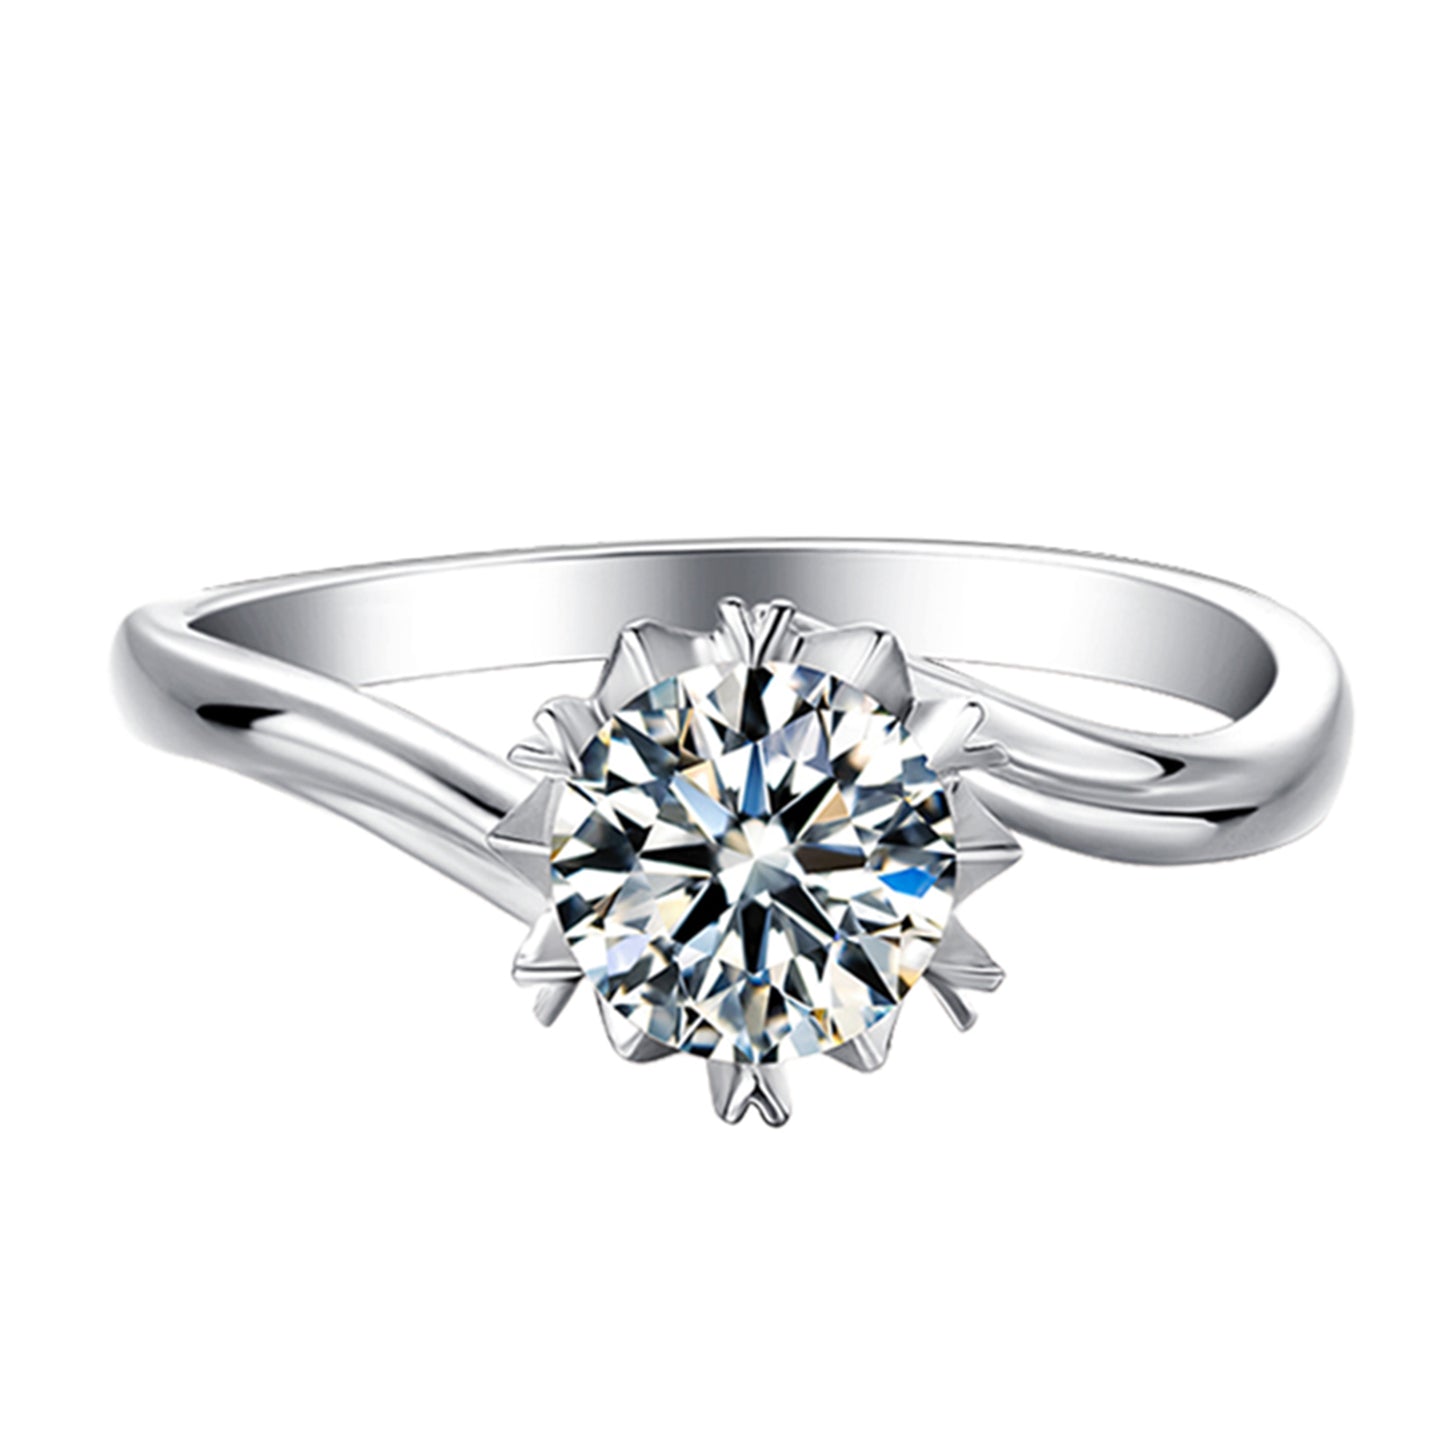 F002 Delicate Round Cut 0.5/1 Carat Six Prongs Solitaire Anniversary Engagement Ring For Her